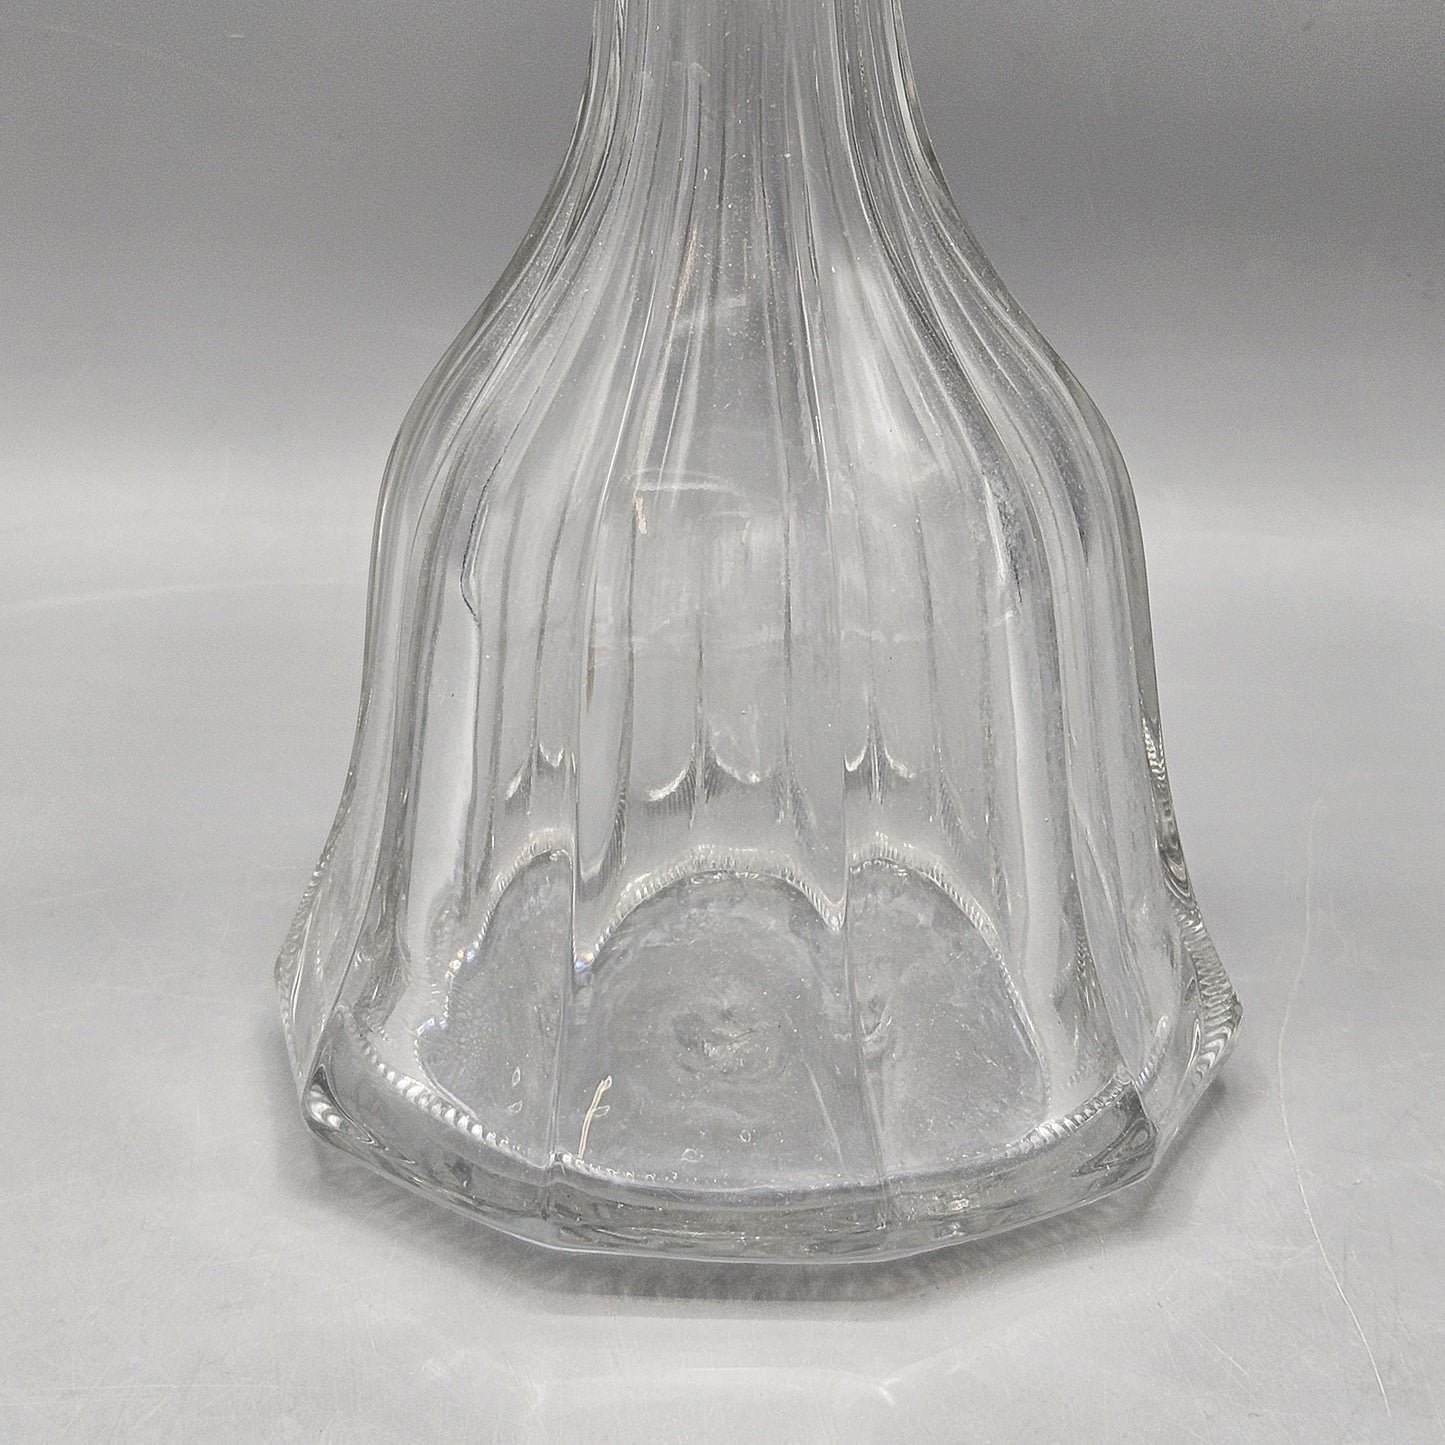 Vintage Heisey Colonial Crystal Decanter with Stopper